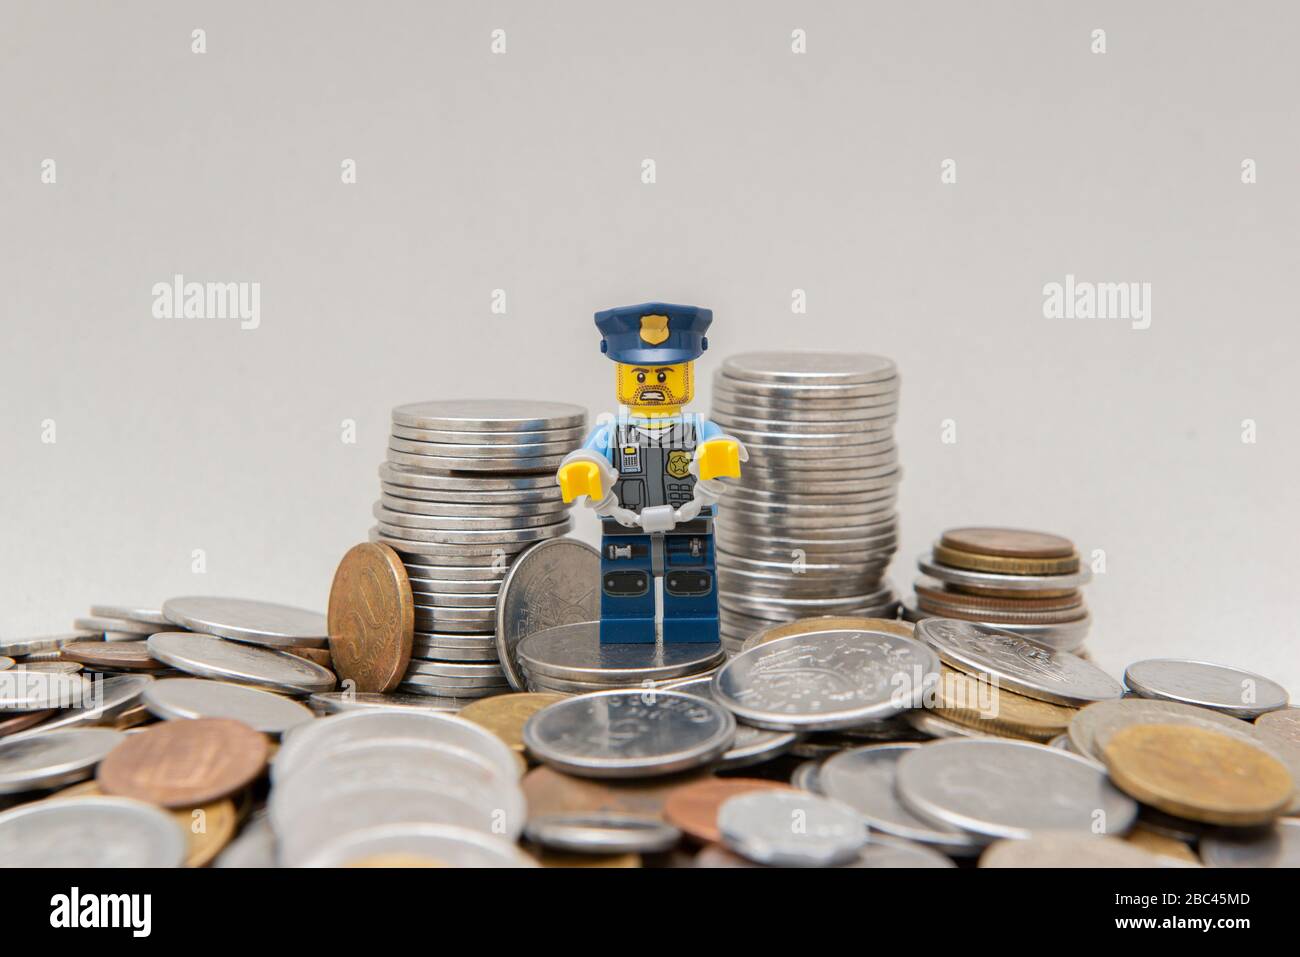 Florianopolis, Brazil, March 28, 2020: Policeman in uniform handcuffed by corruption near coins. Hand cuffed police officer for crime committed. Lego Stock Photo